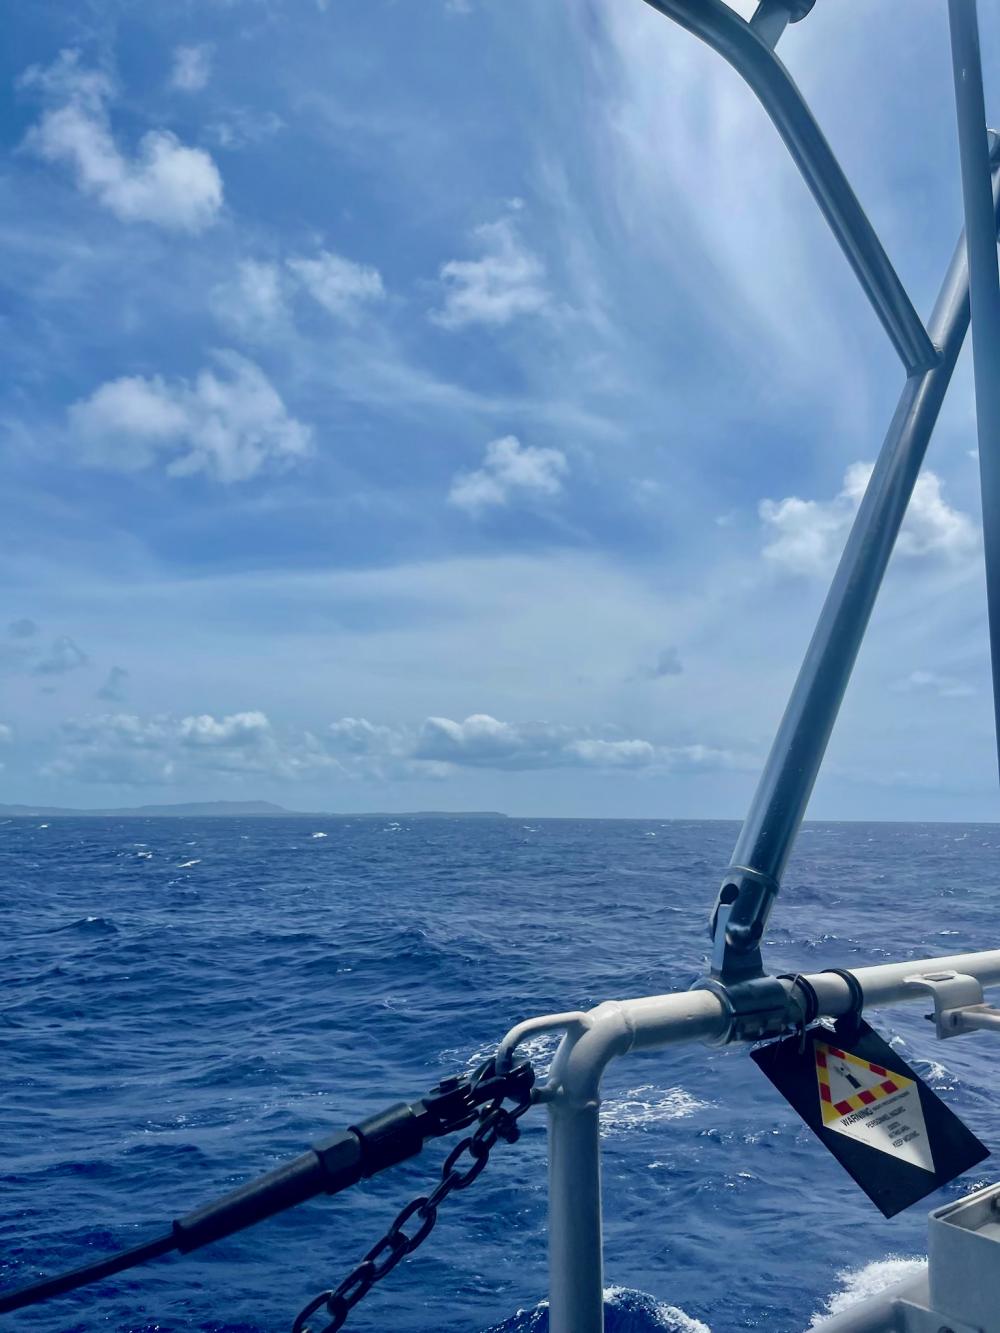 At sea conditions as seen from the USCGC Myrtle Hazard (WPC 1139) off Guam's west side on the afternoon of March 17, 2023. 